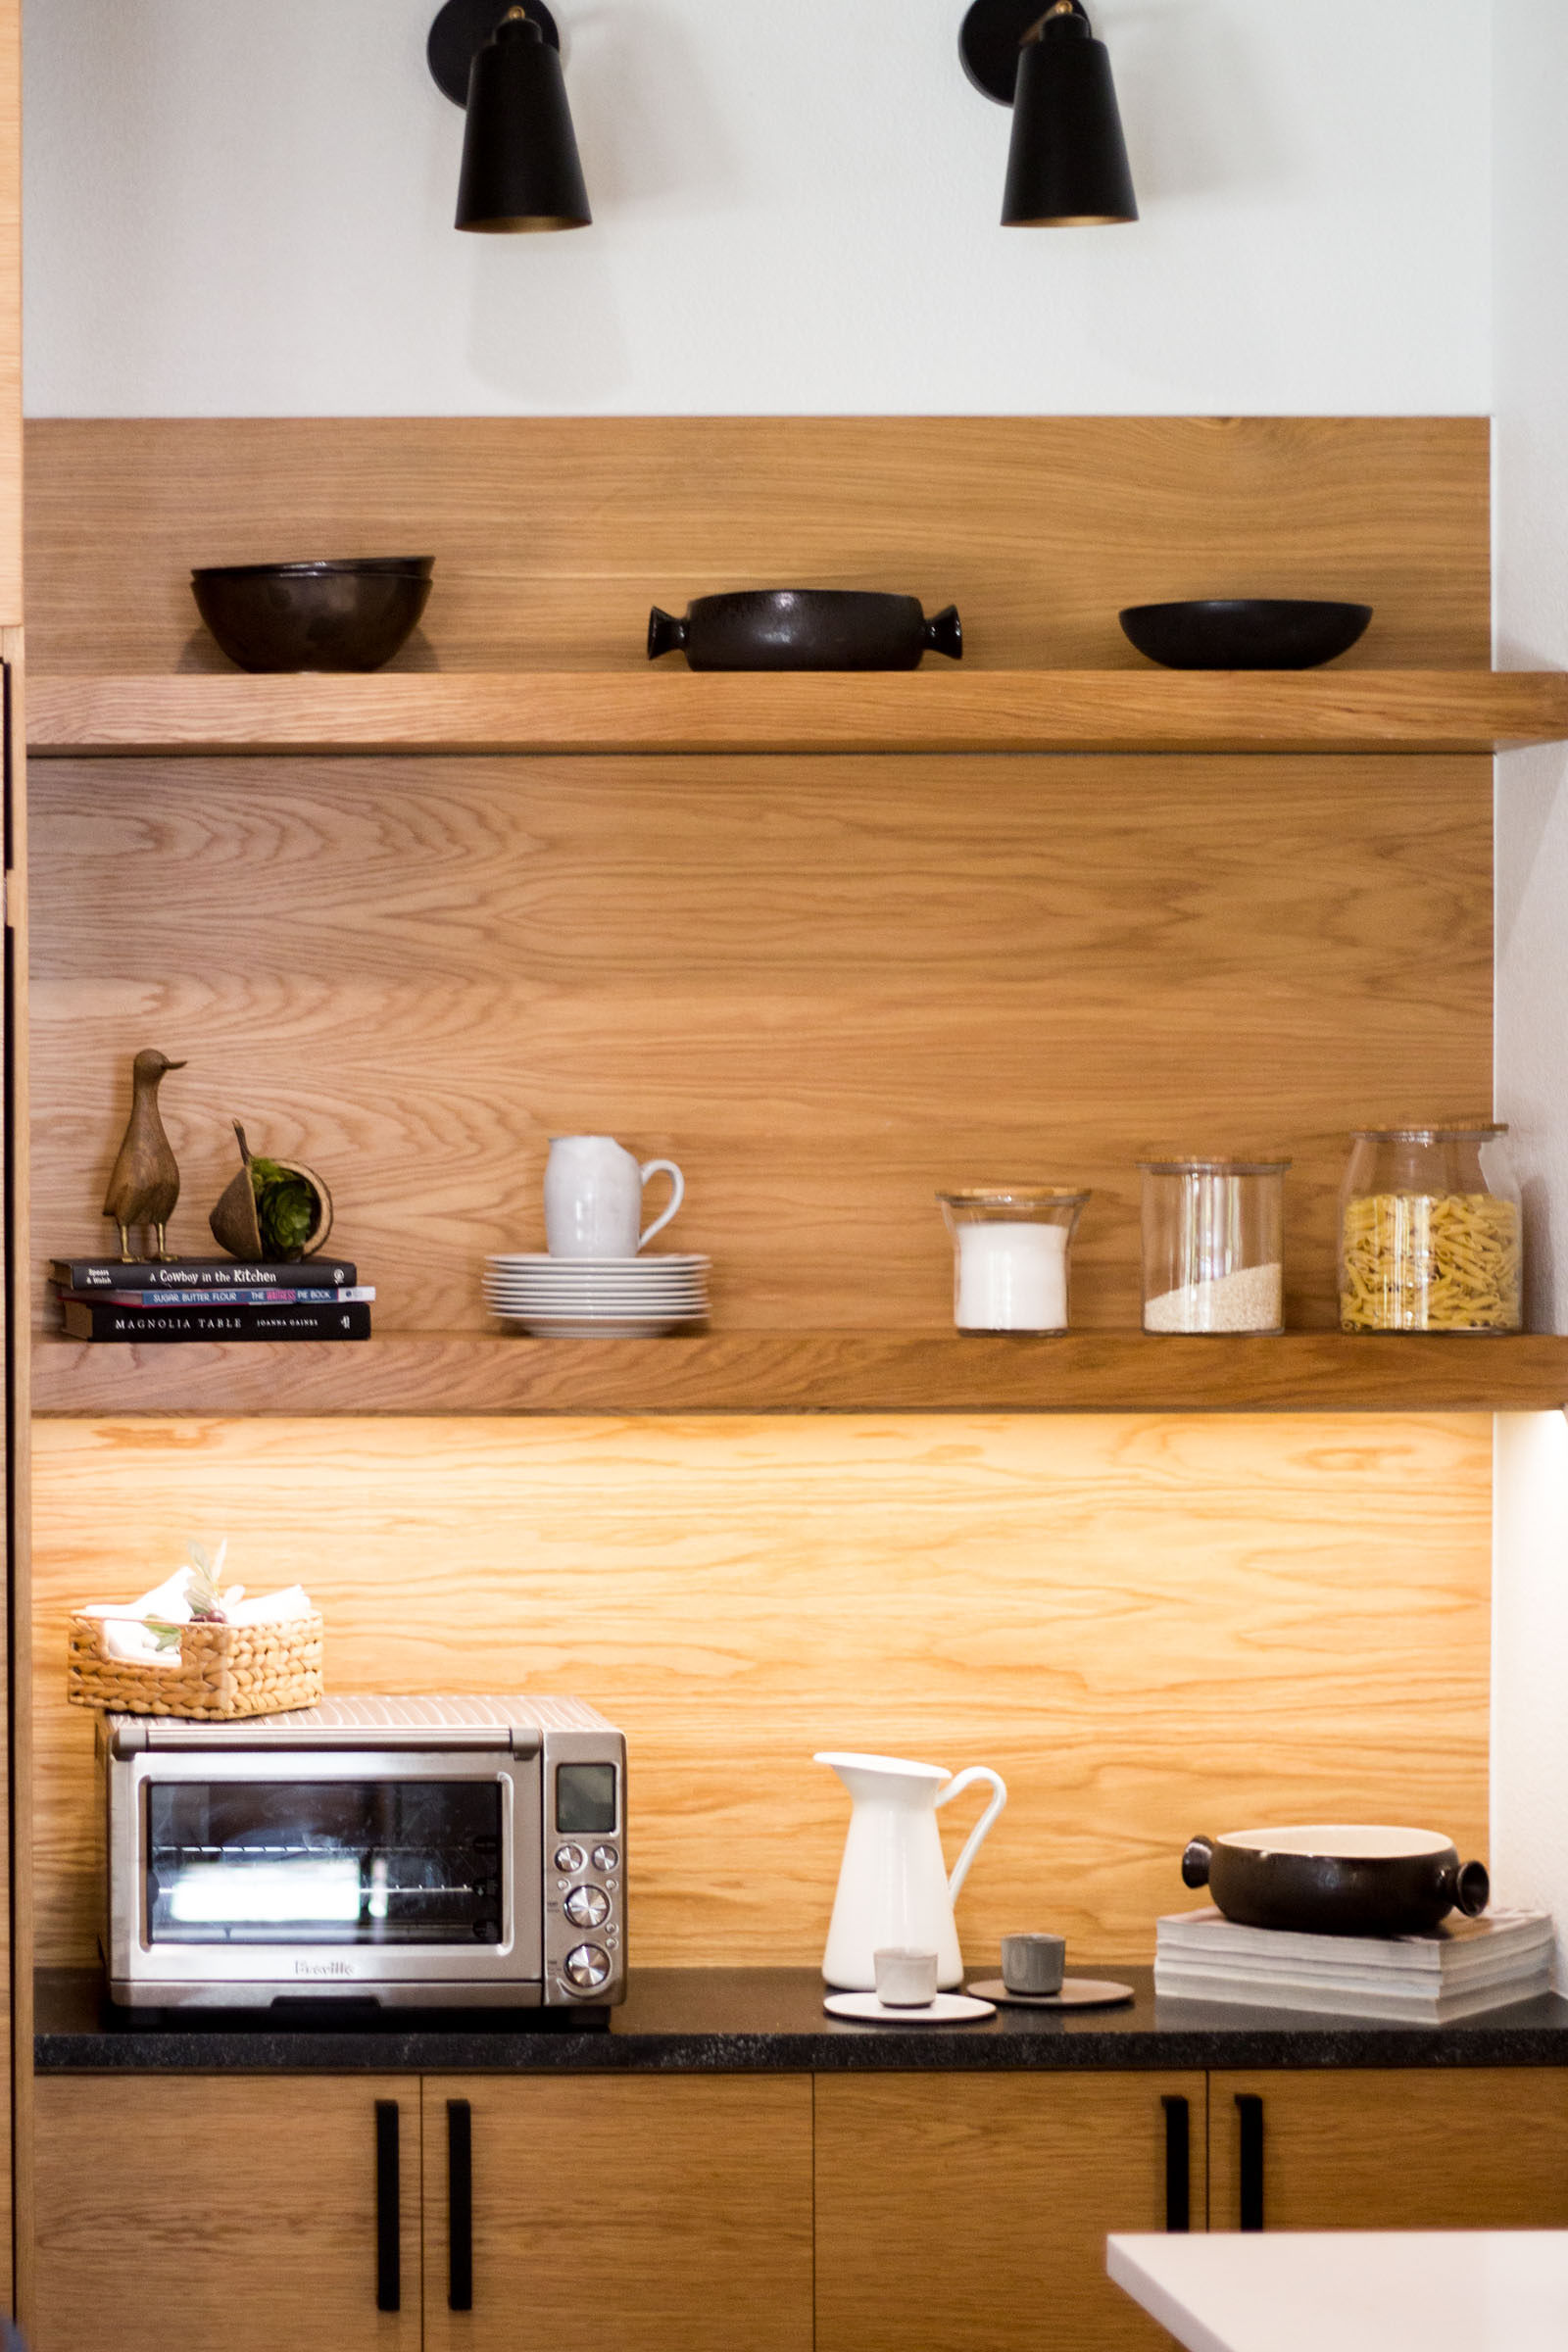 Exposed blonde wood shelves with decor and cookware, toaster oven, plates and under lighting.